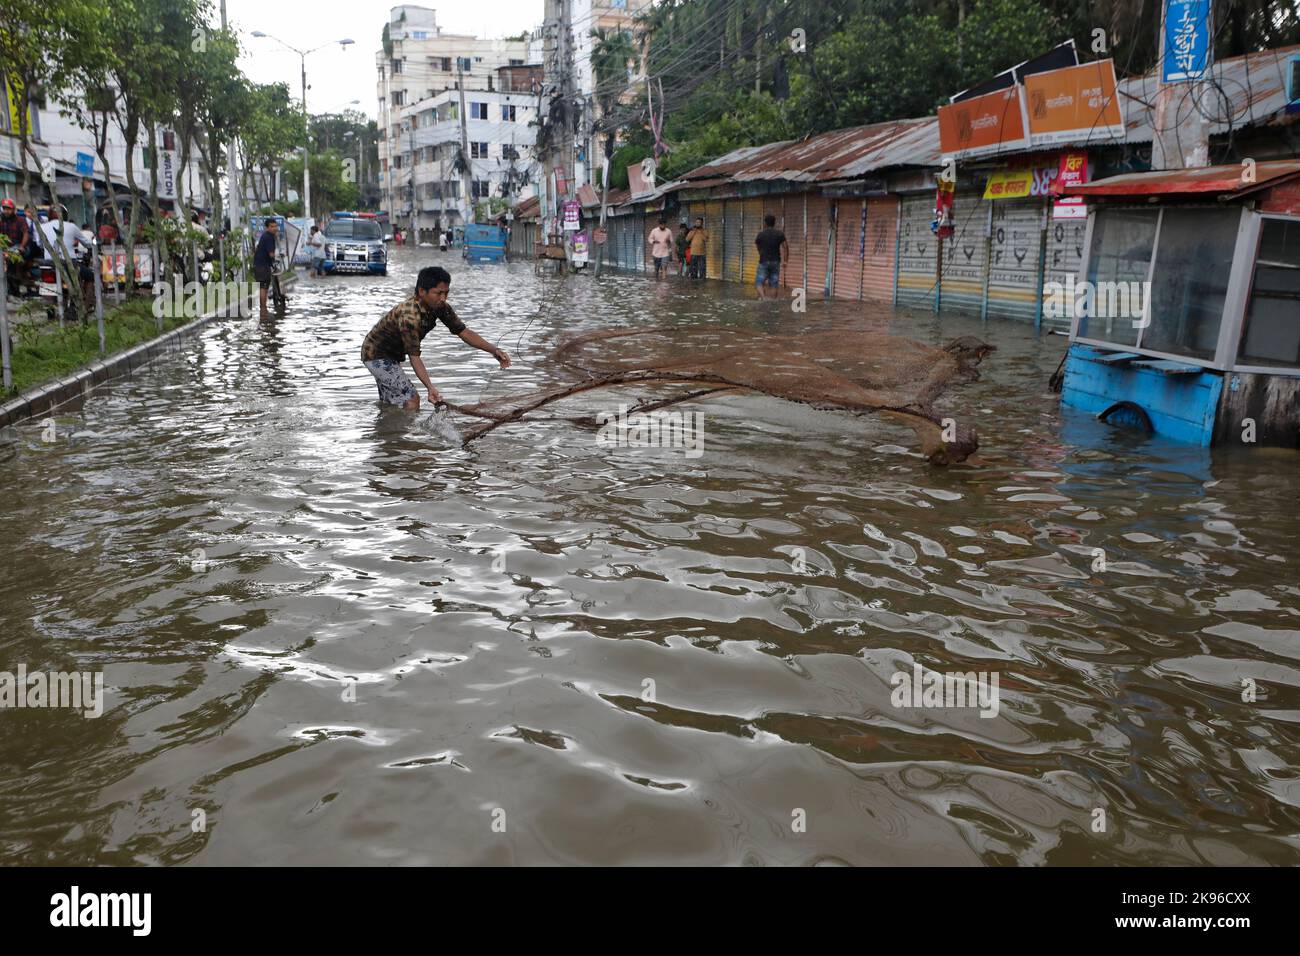 Barisal, Bangladesh - October 25, 2022: Due to the impact of Cyclone Sitrang, water has accumulated in many areas of Barisal city due to rains through Stock Photo